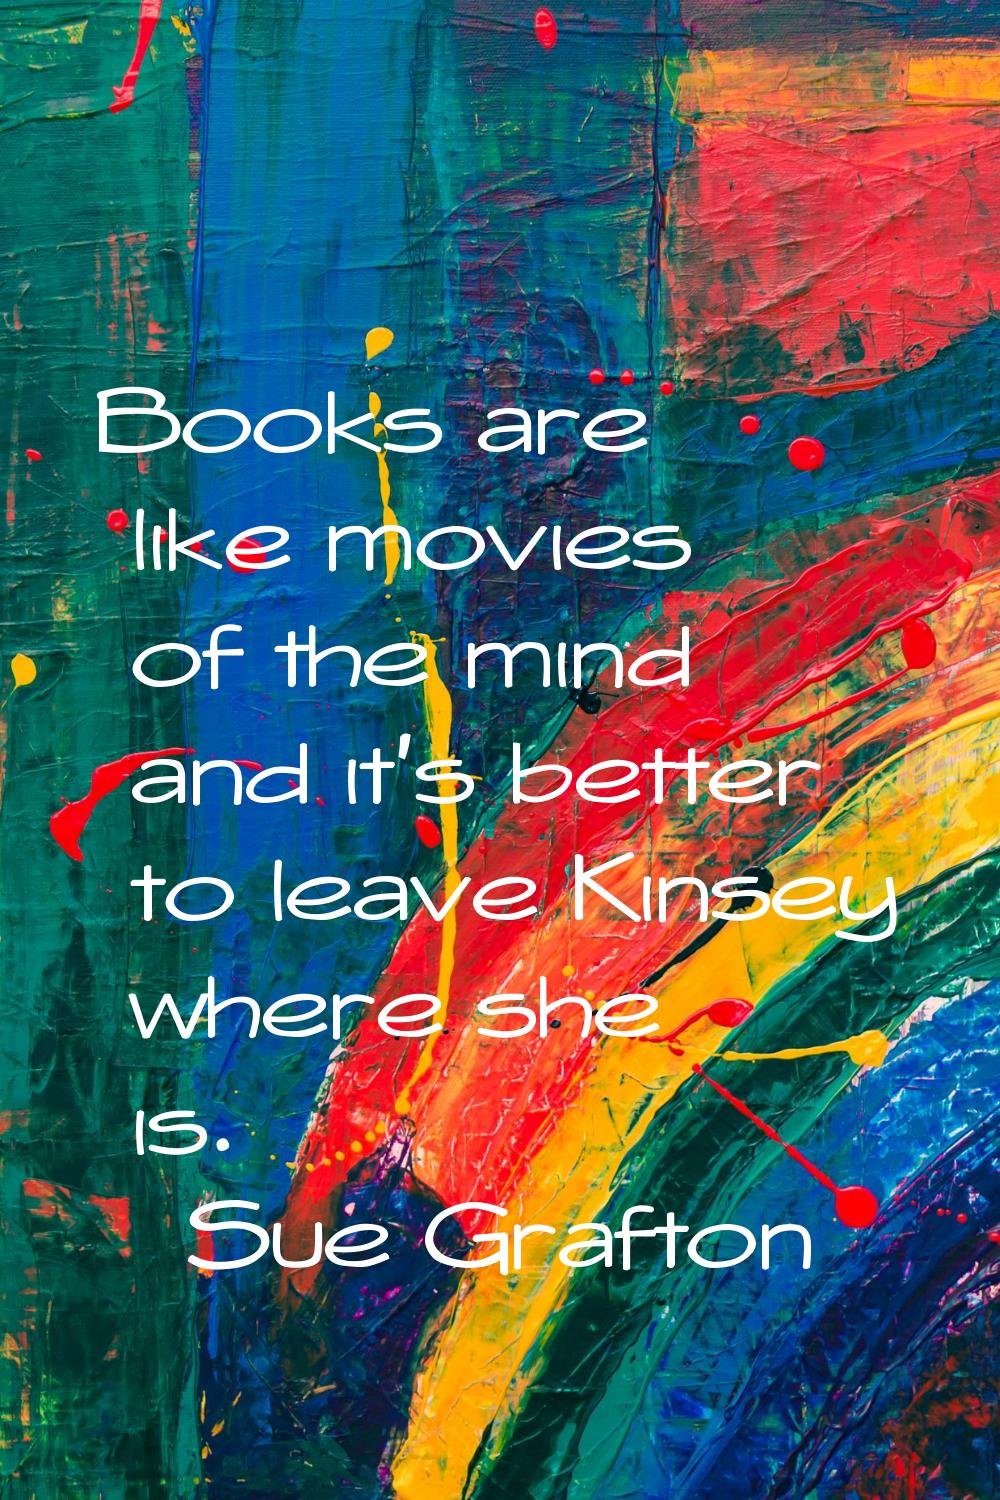 Books are like movies of the mind and it's better to leave Kinsey where she is.